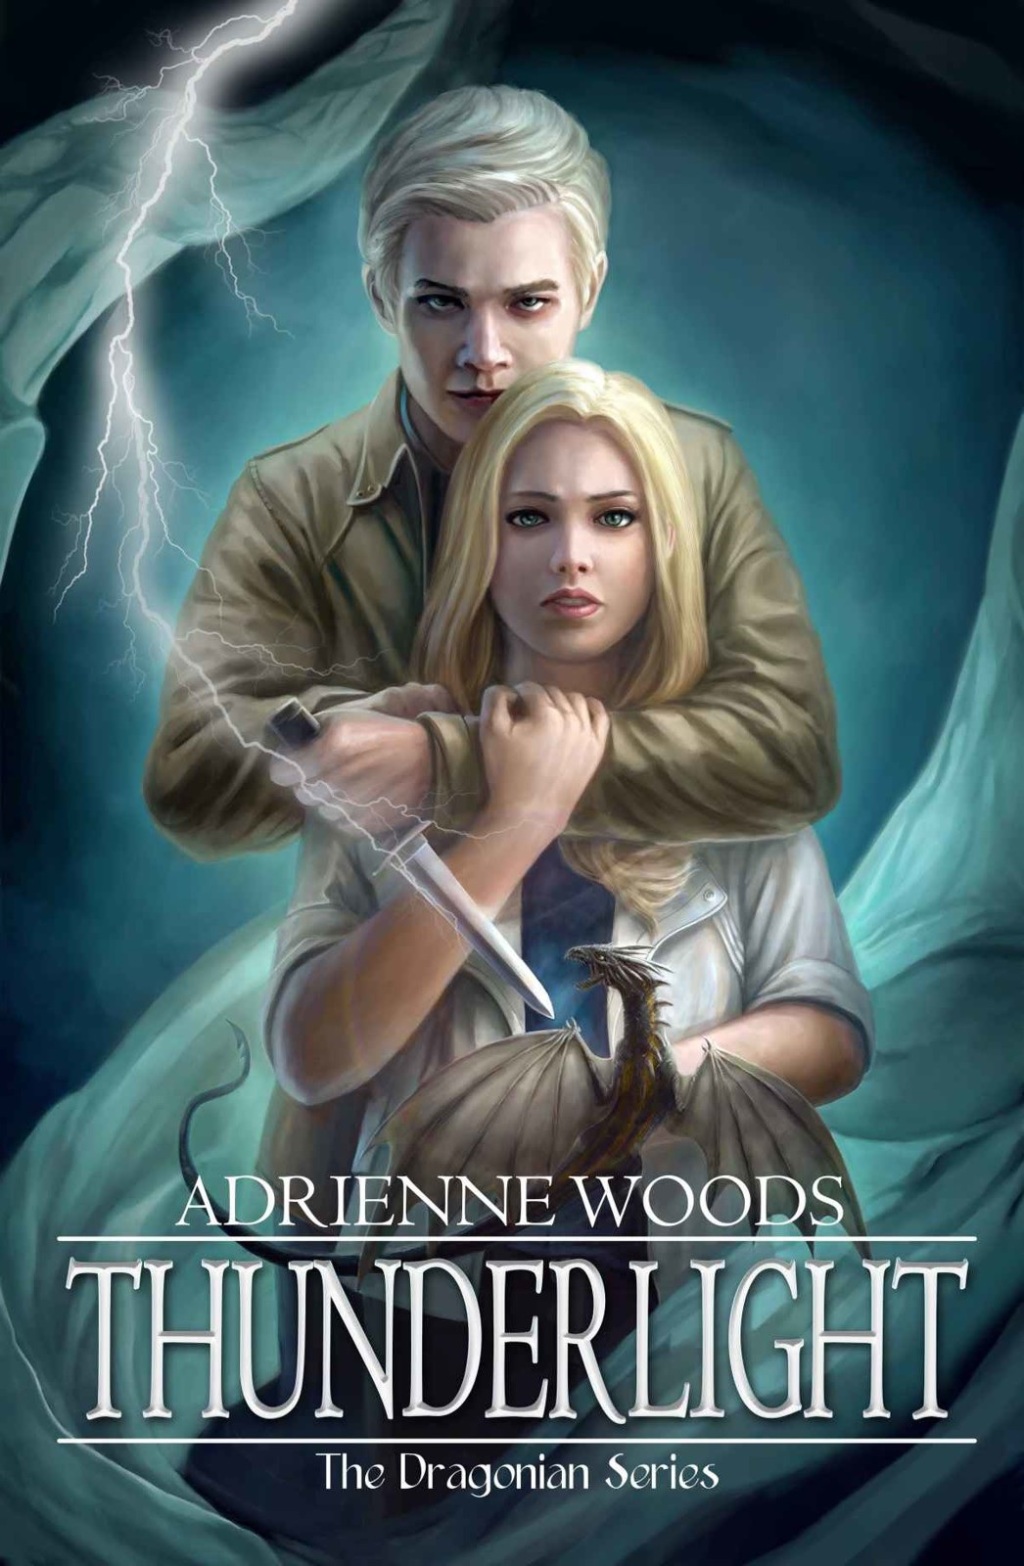 Thunderlight – A tad disappointed. Not as good as the first book.